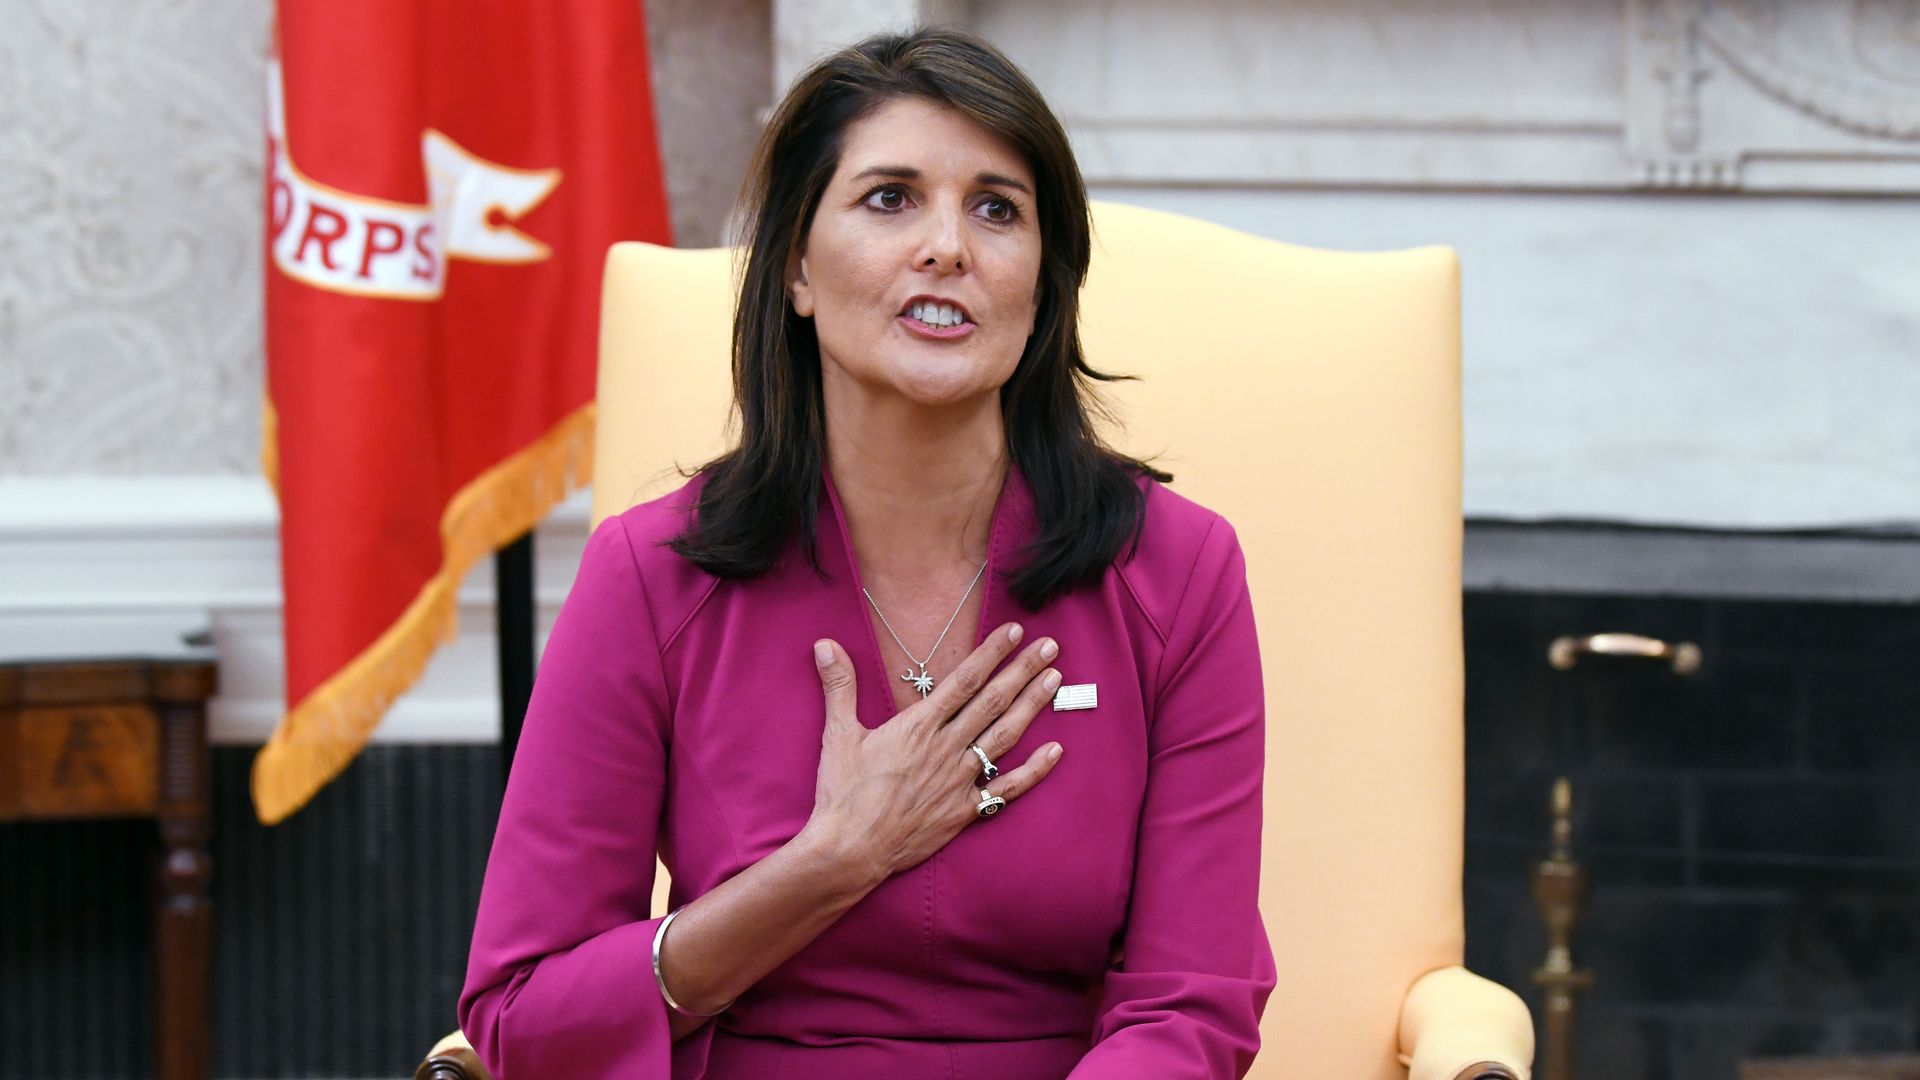 Nikki Haley sits in a yellow chair in the Oval Office in this picture.